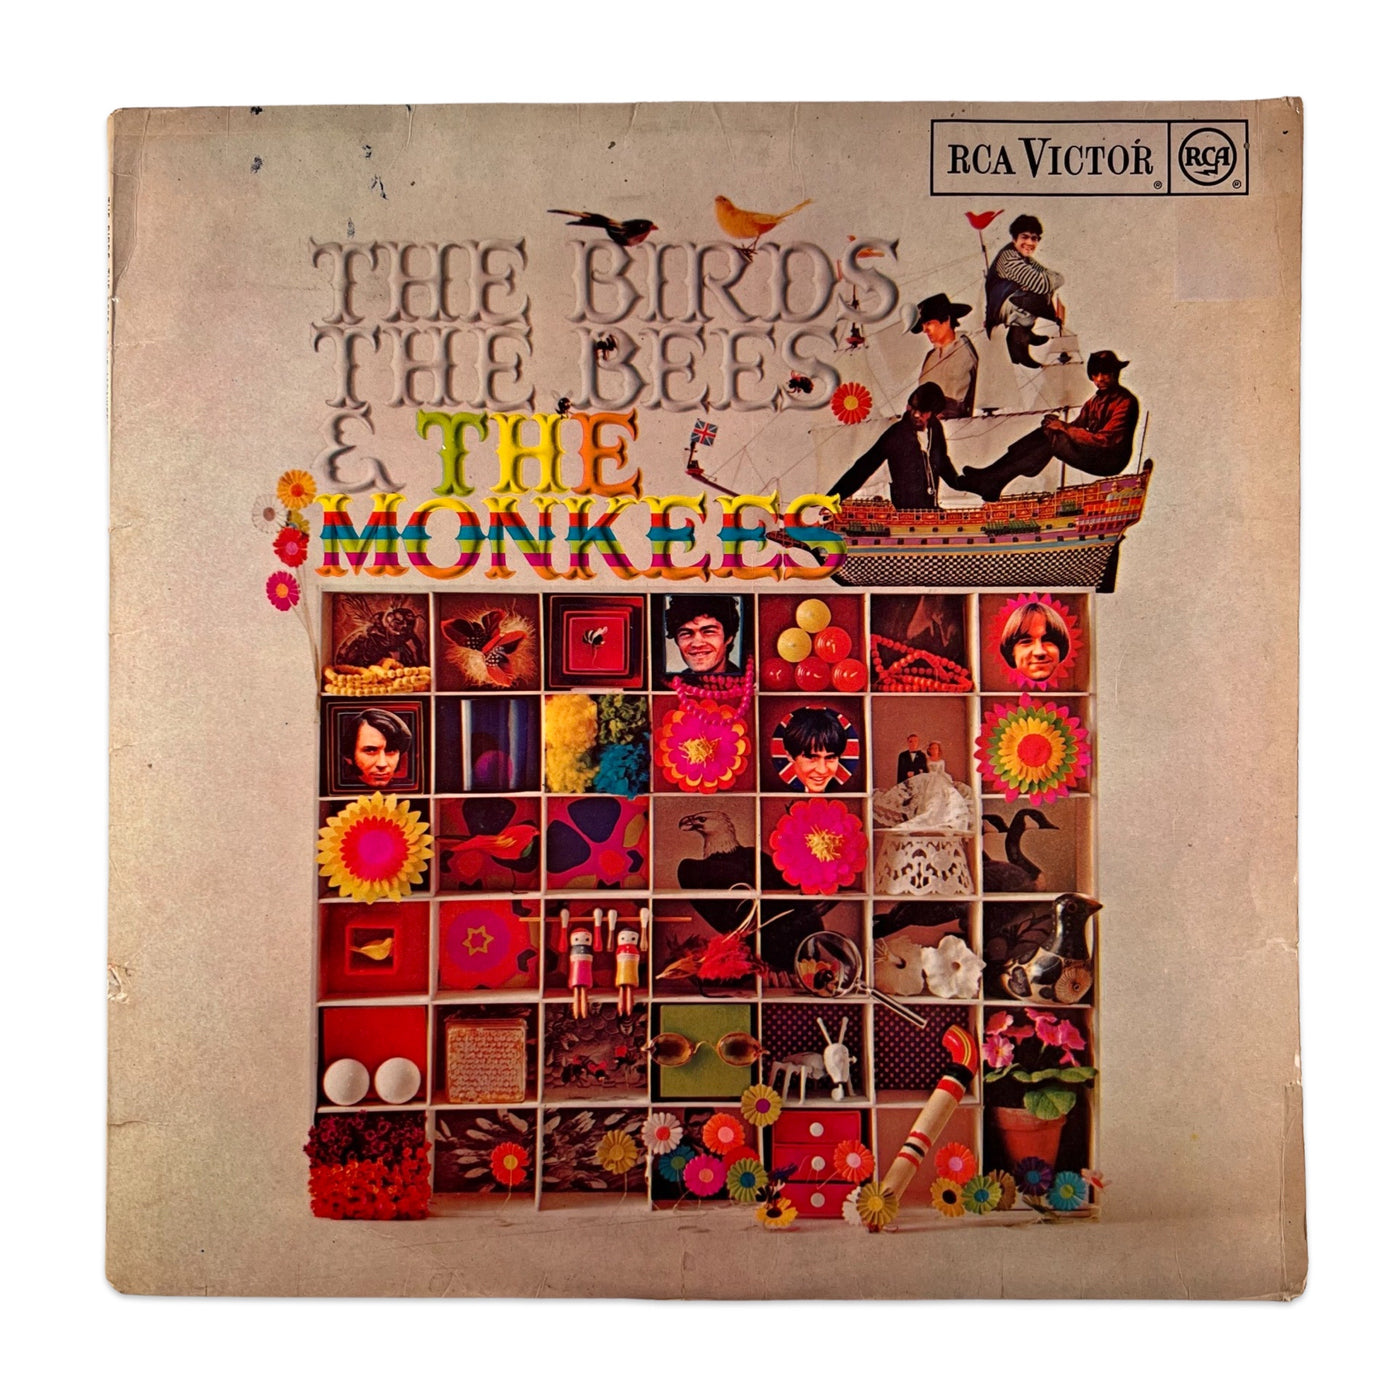 The Monkees - The Birds, The Bees & The Monkees - 1968 UK Press